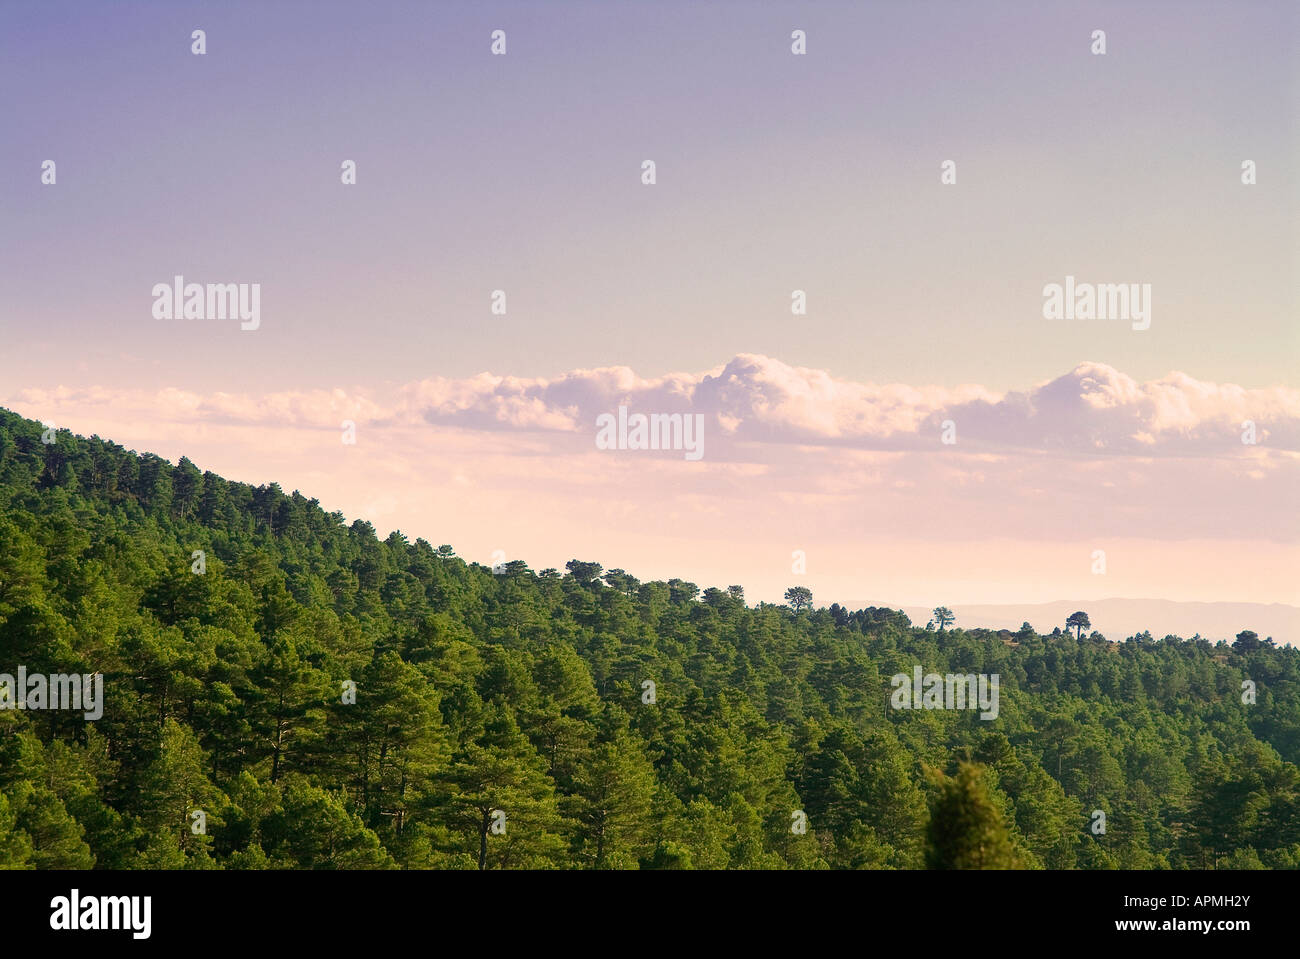 Pine tree forest. Gudar - Javalambre country. Teruel province. Spain Stock Photo